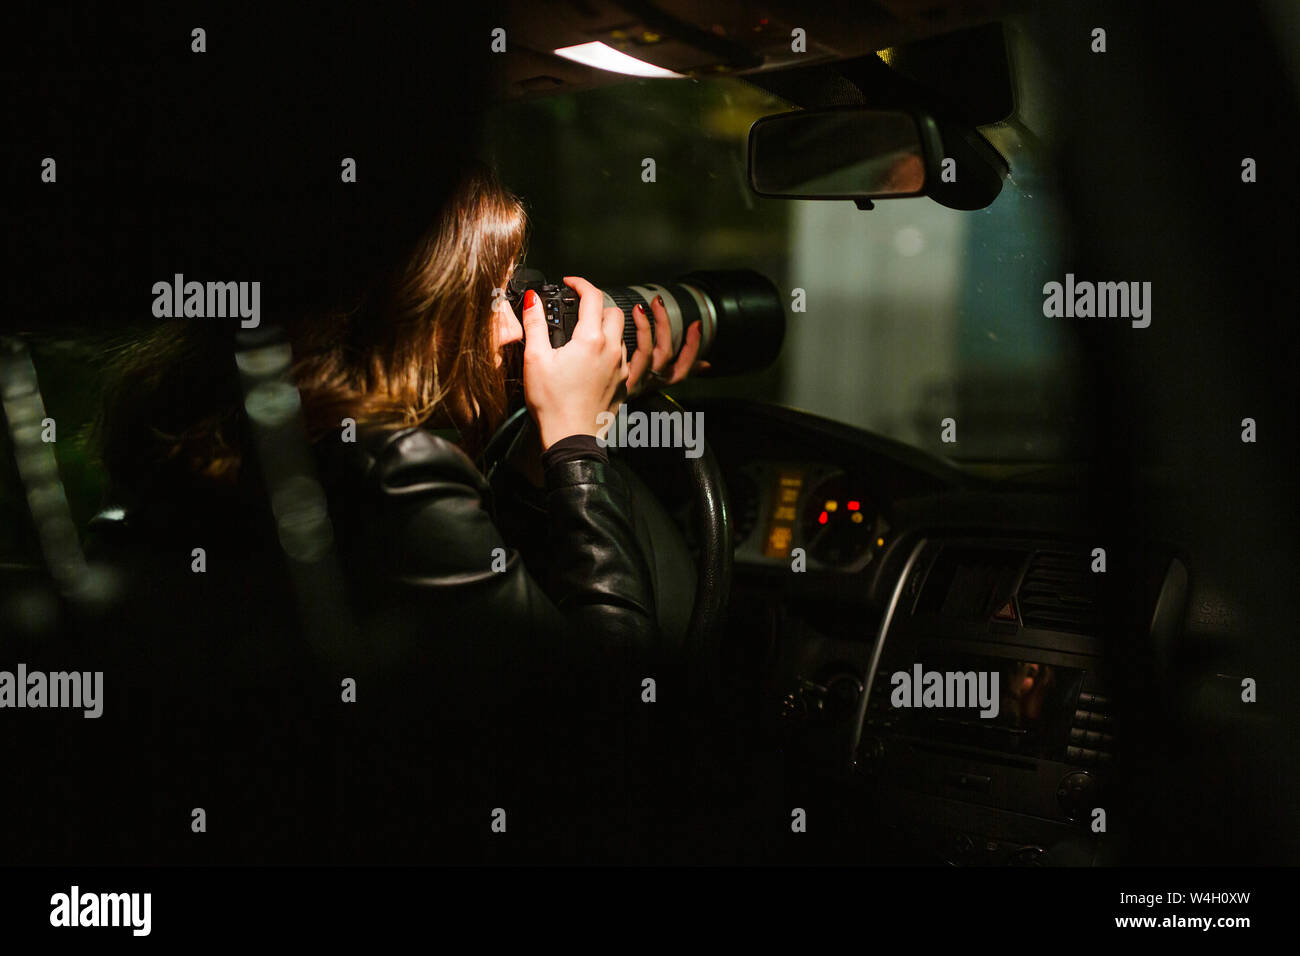 Young woman taking pictures with a camera out of a car at night Stock Photo